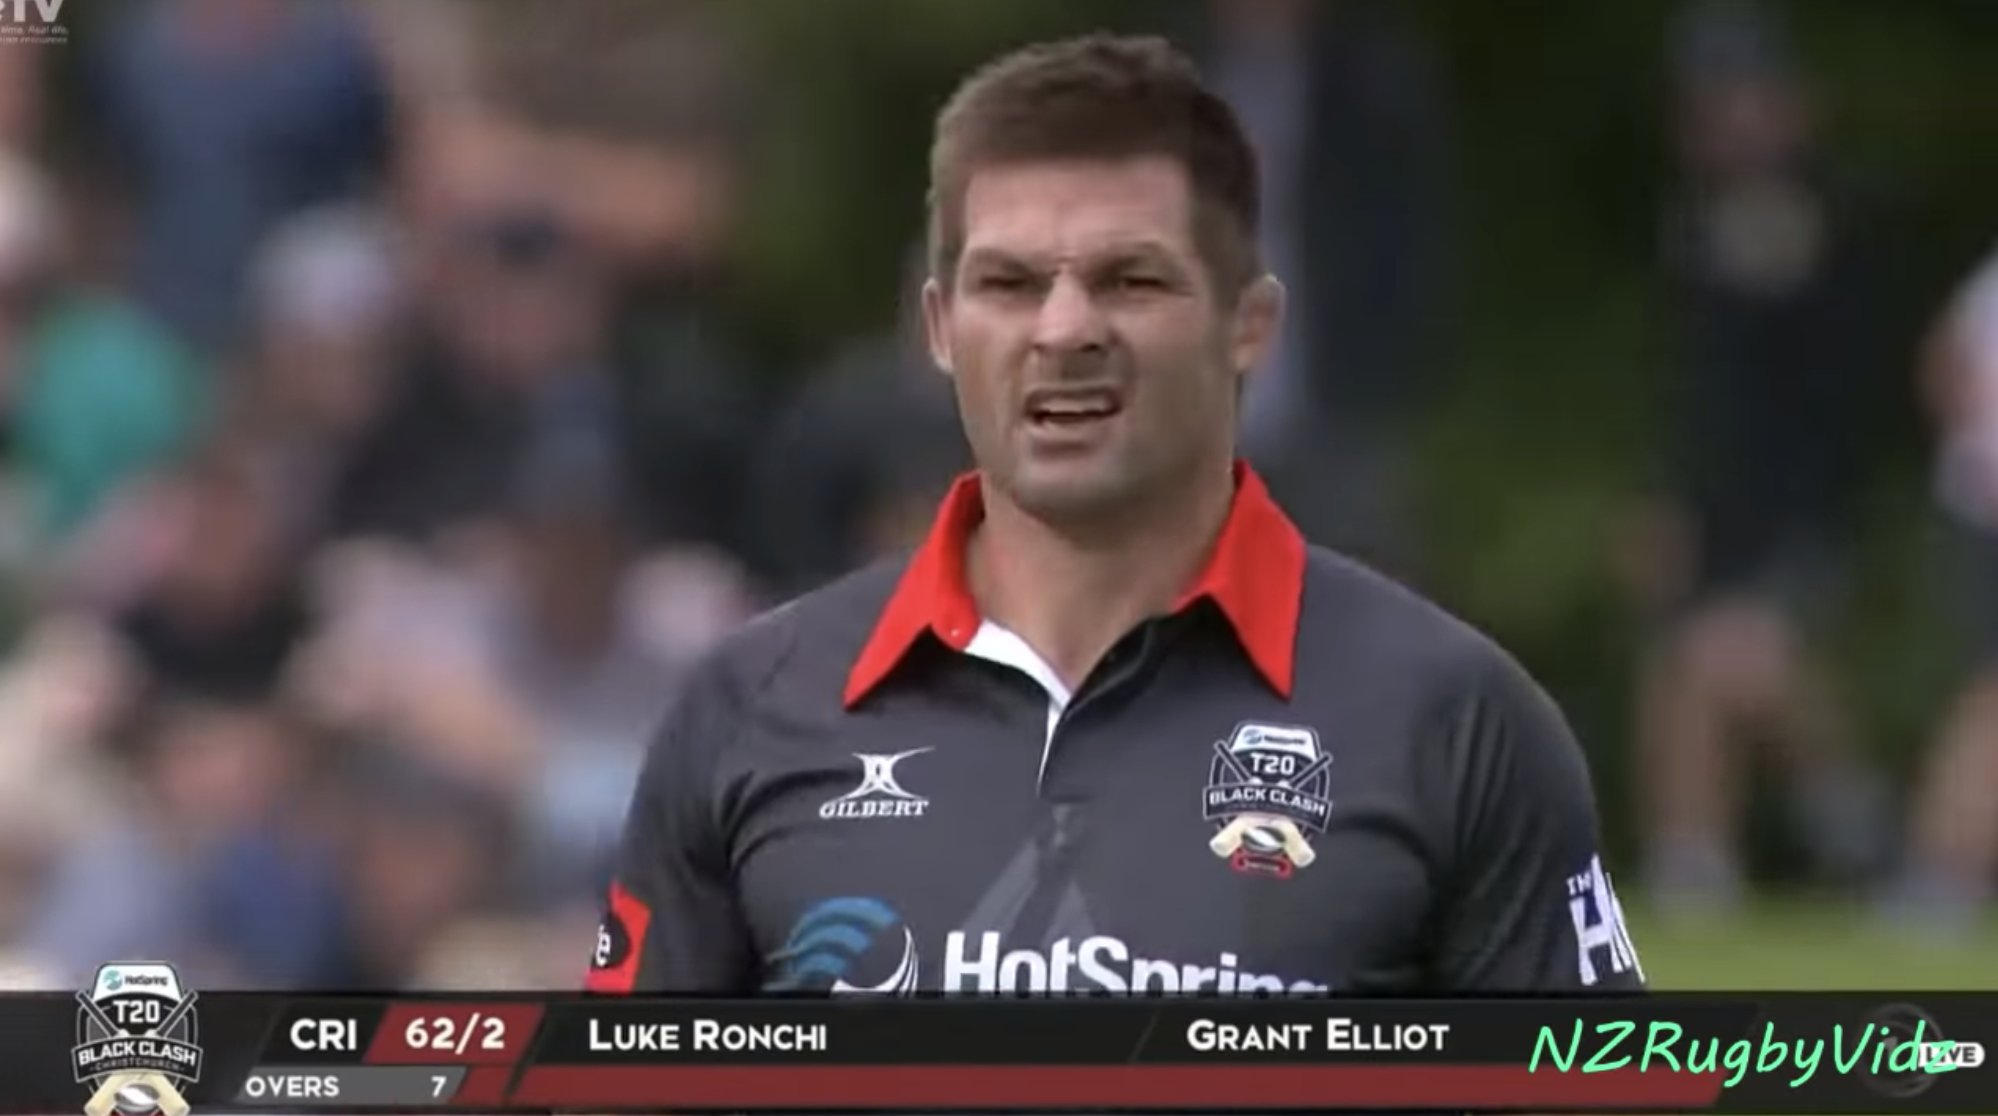 WATCH: Cricket world in shock as former and current All Blacks switch sports and DOMINATE